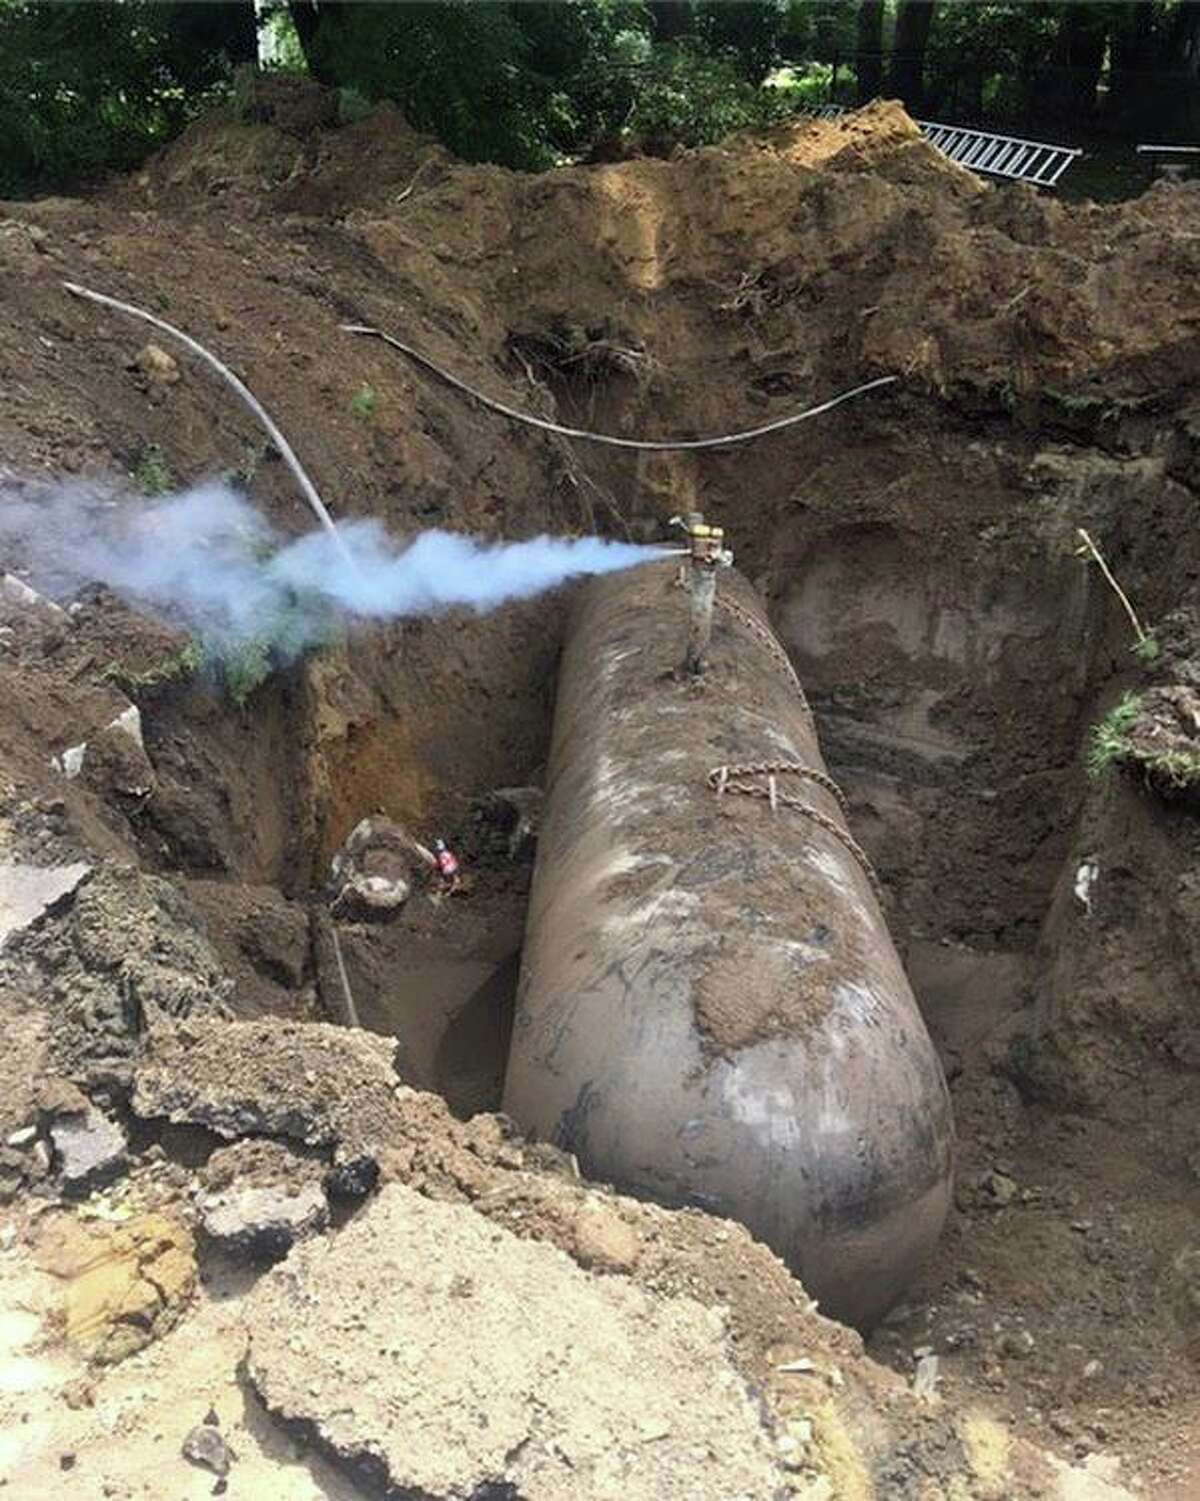 Westport Fire Department responded to a report of a propane leak from an underground tank on July 17, 2019, in the area of Minute Man Hill.